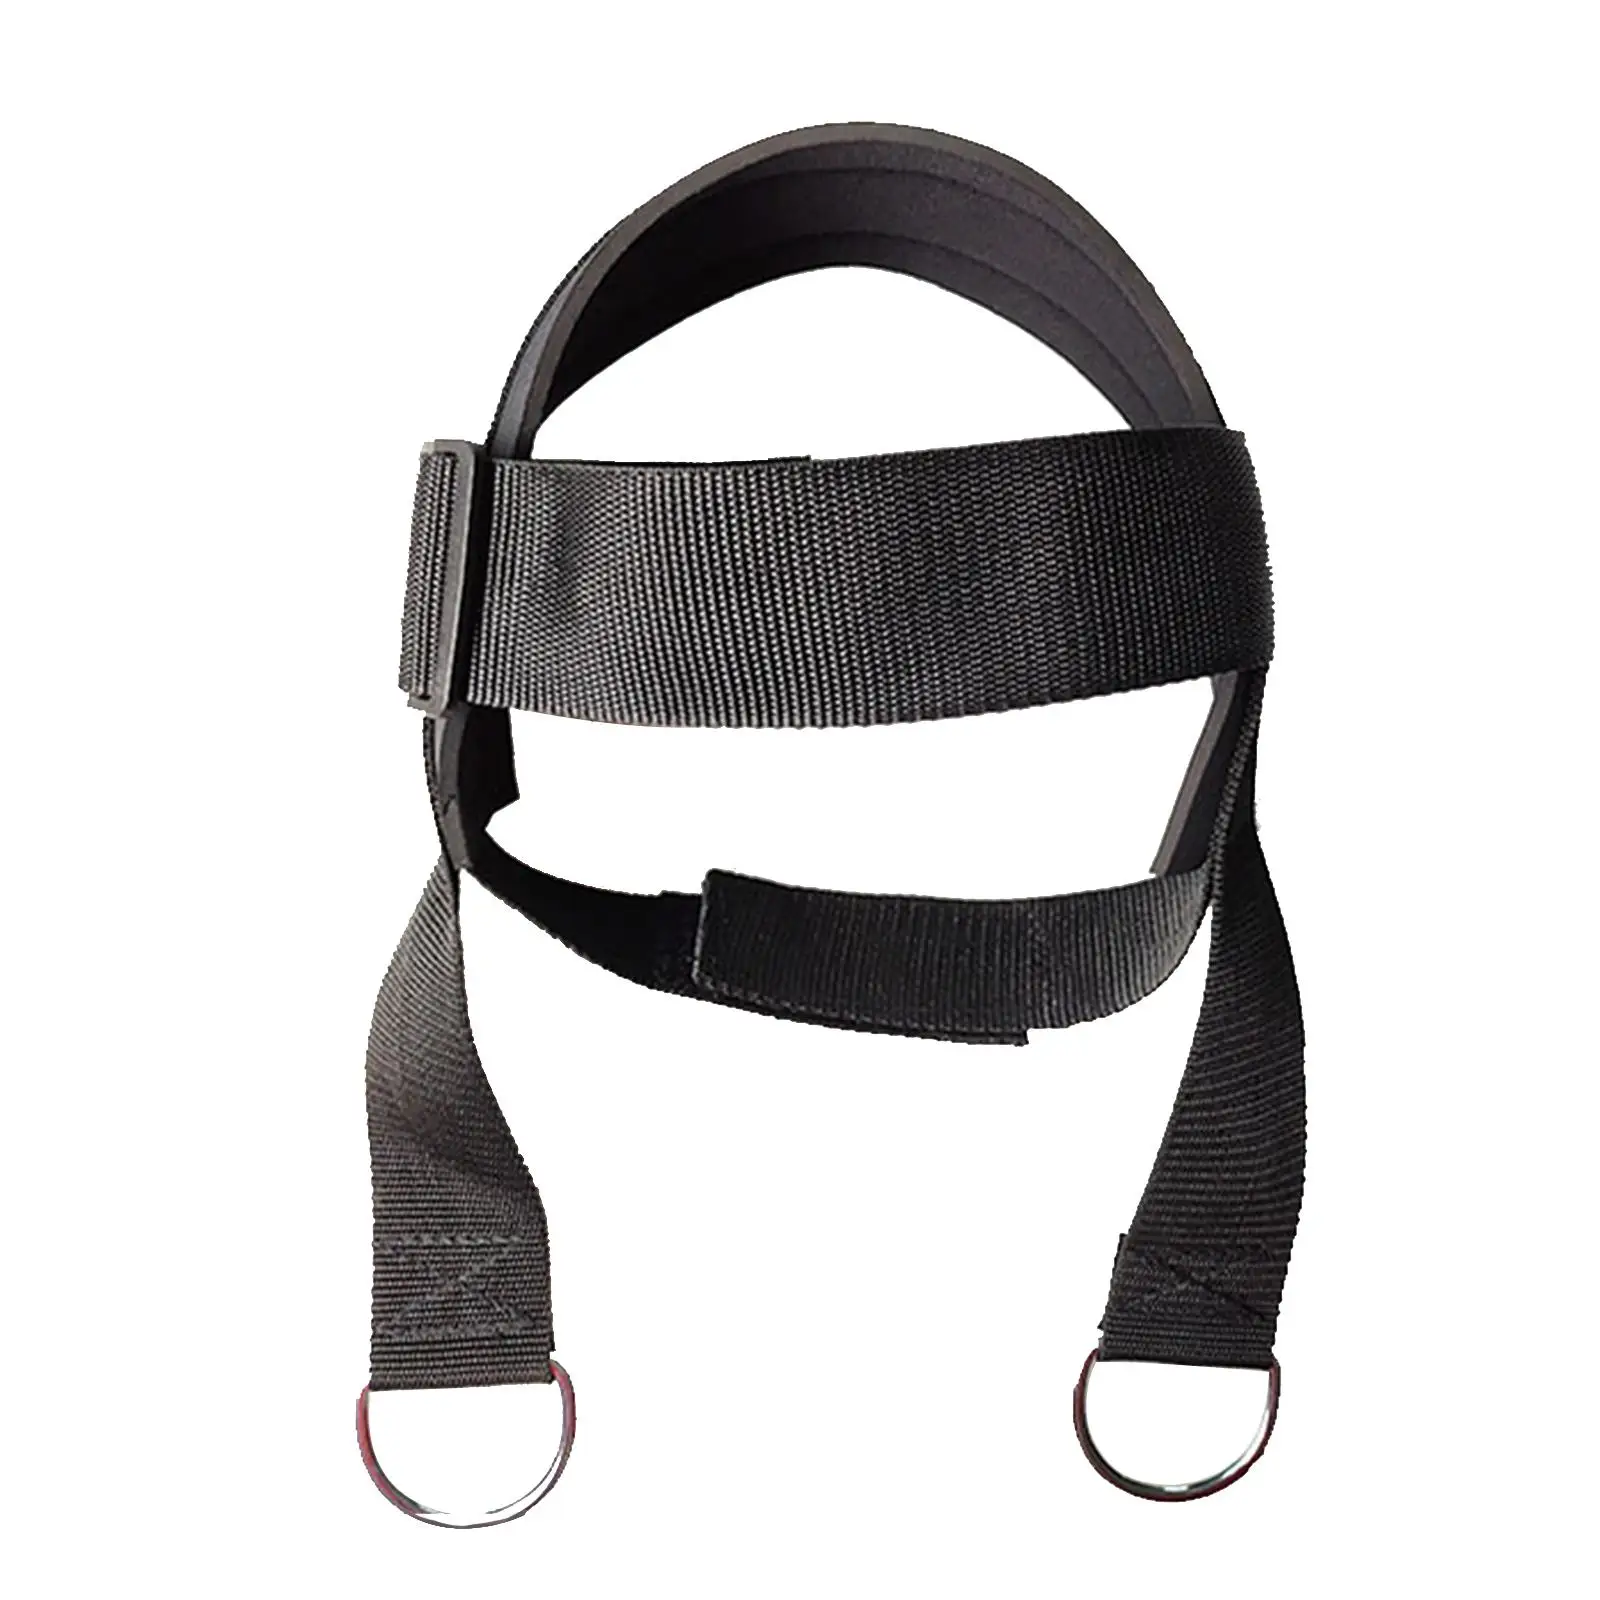 Head Neck Harness Equipment with Metal Loop Muscle Building Exercise Weight Lifting for Fitness Workout Women Men Trainer Home